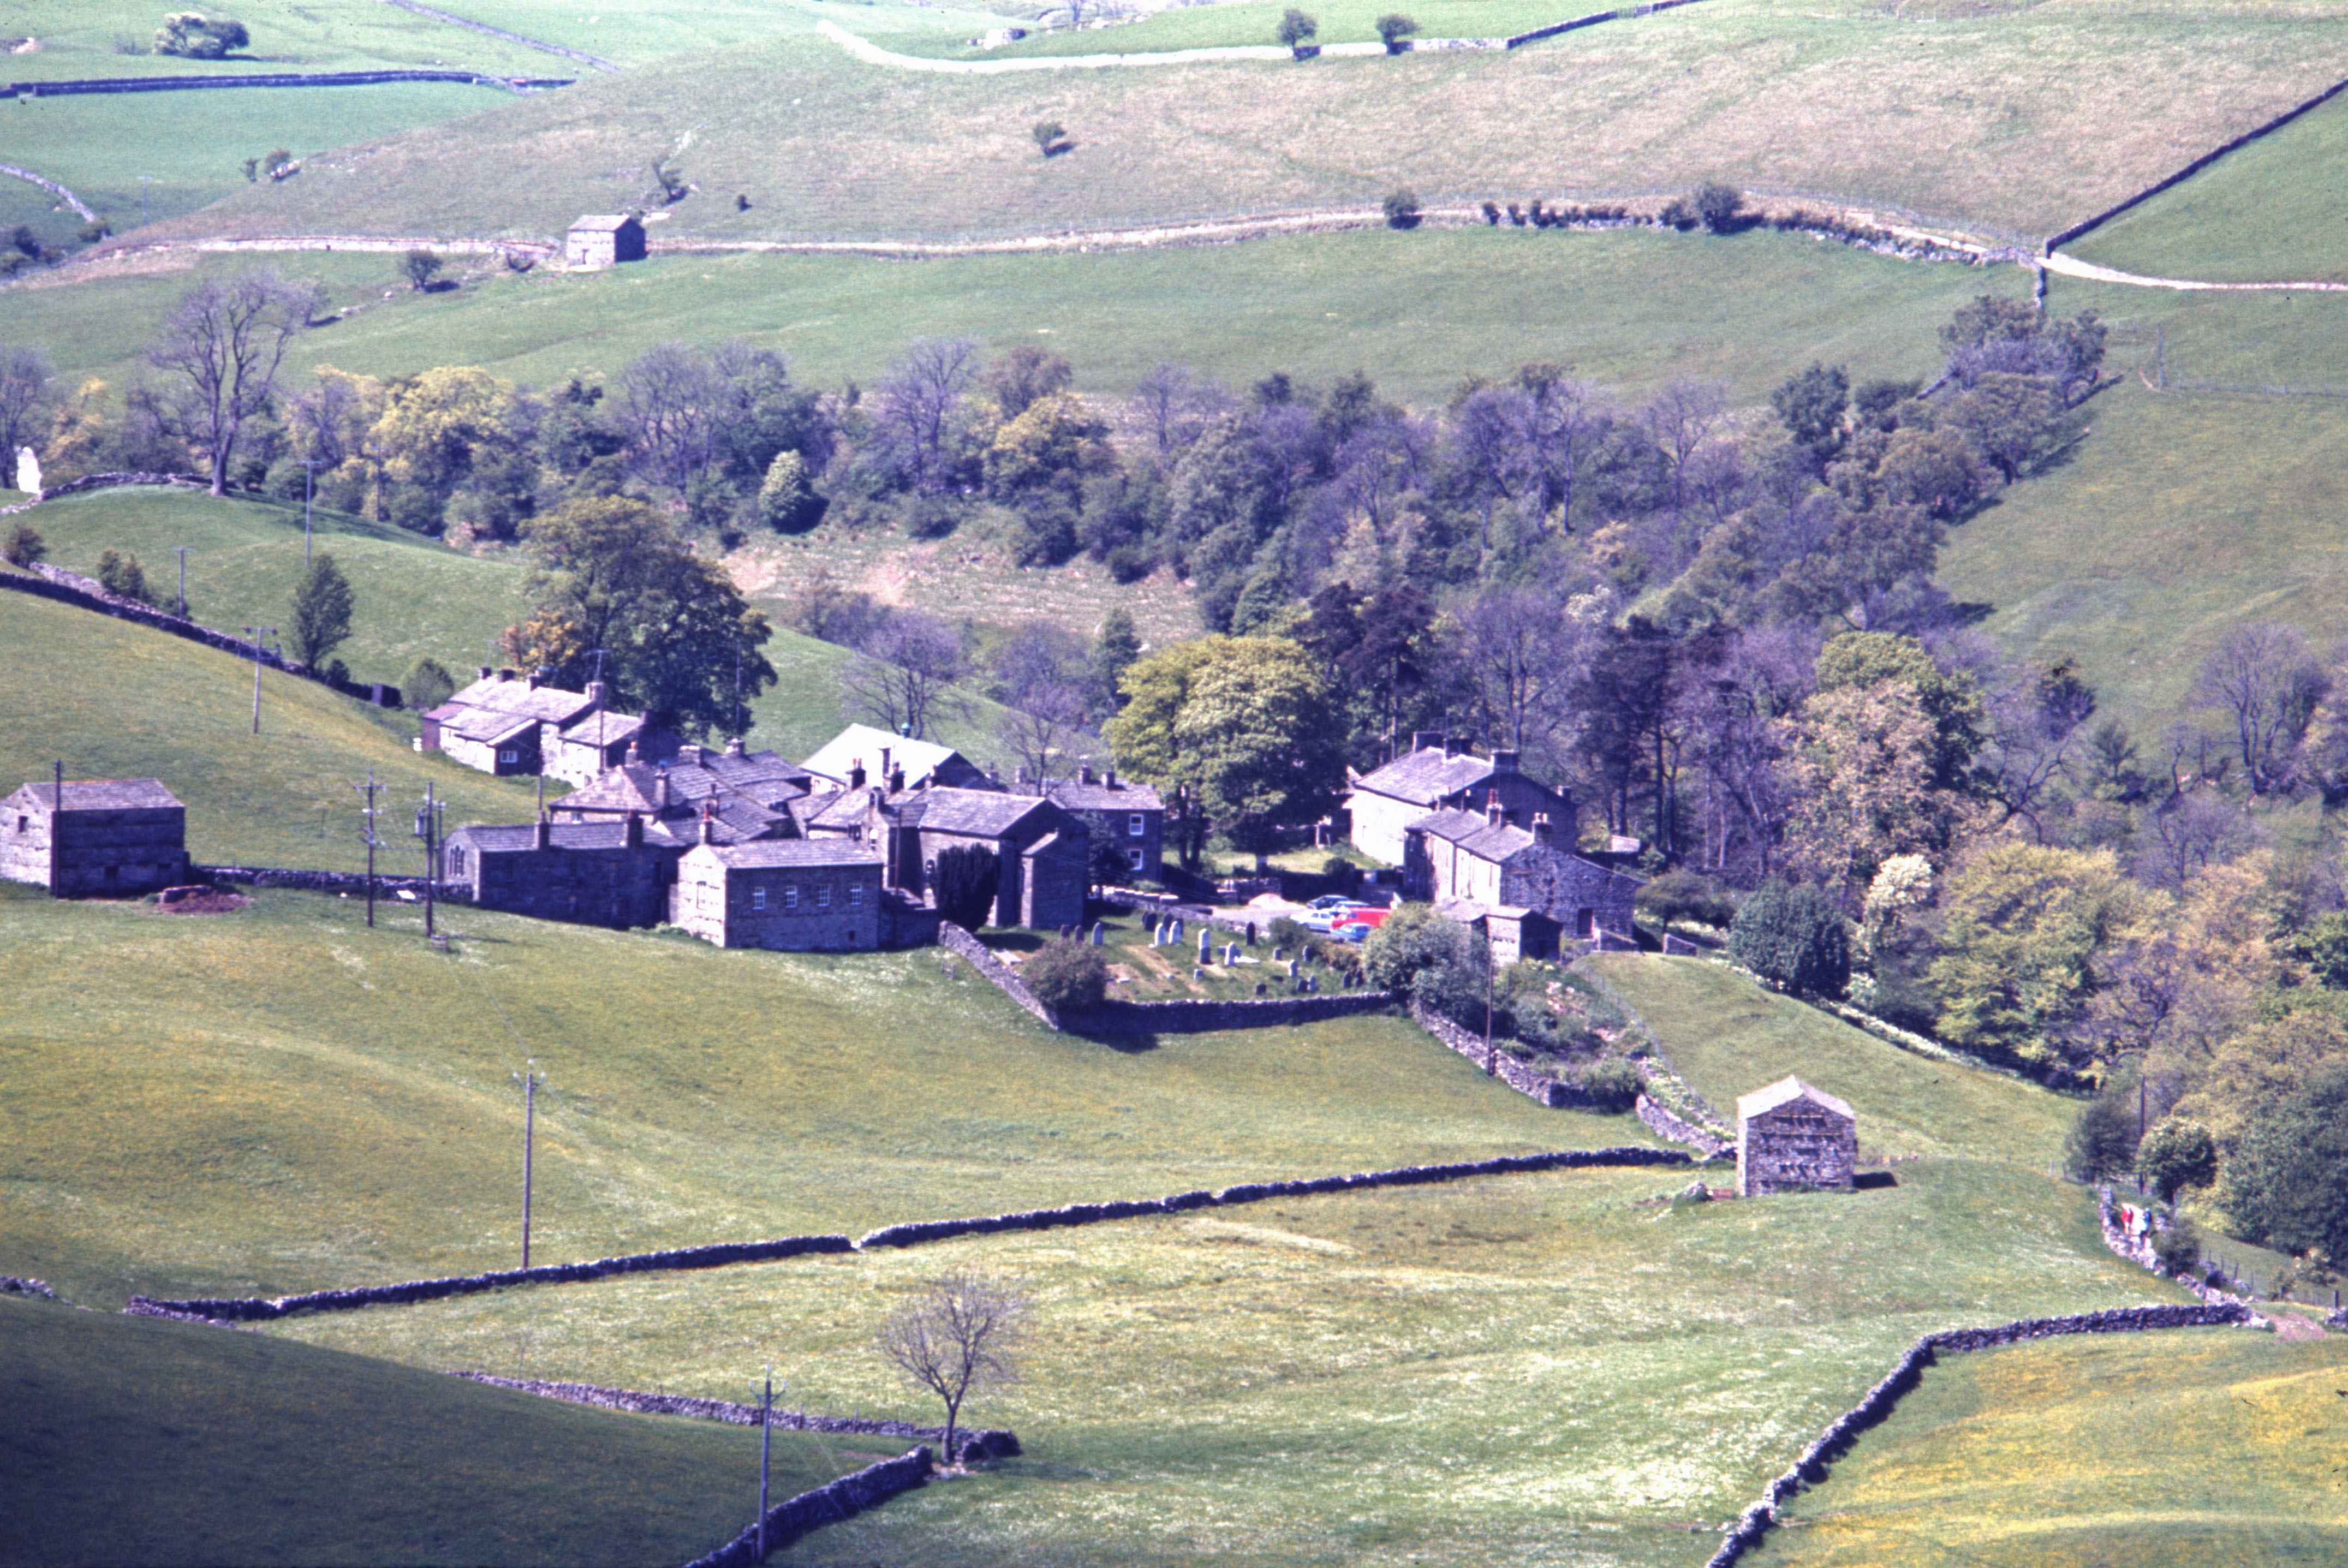 7404111 28 May 1974 - A view of Keld village from the hills to the south.